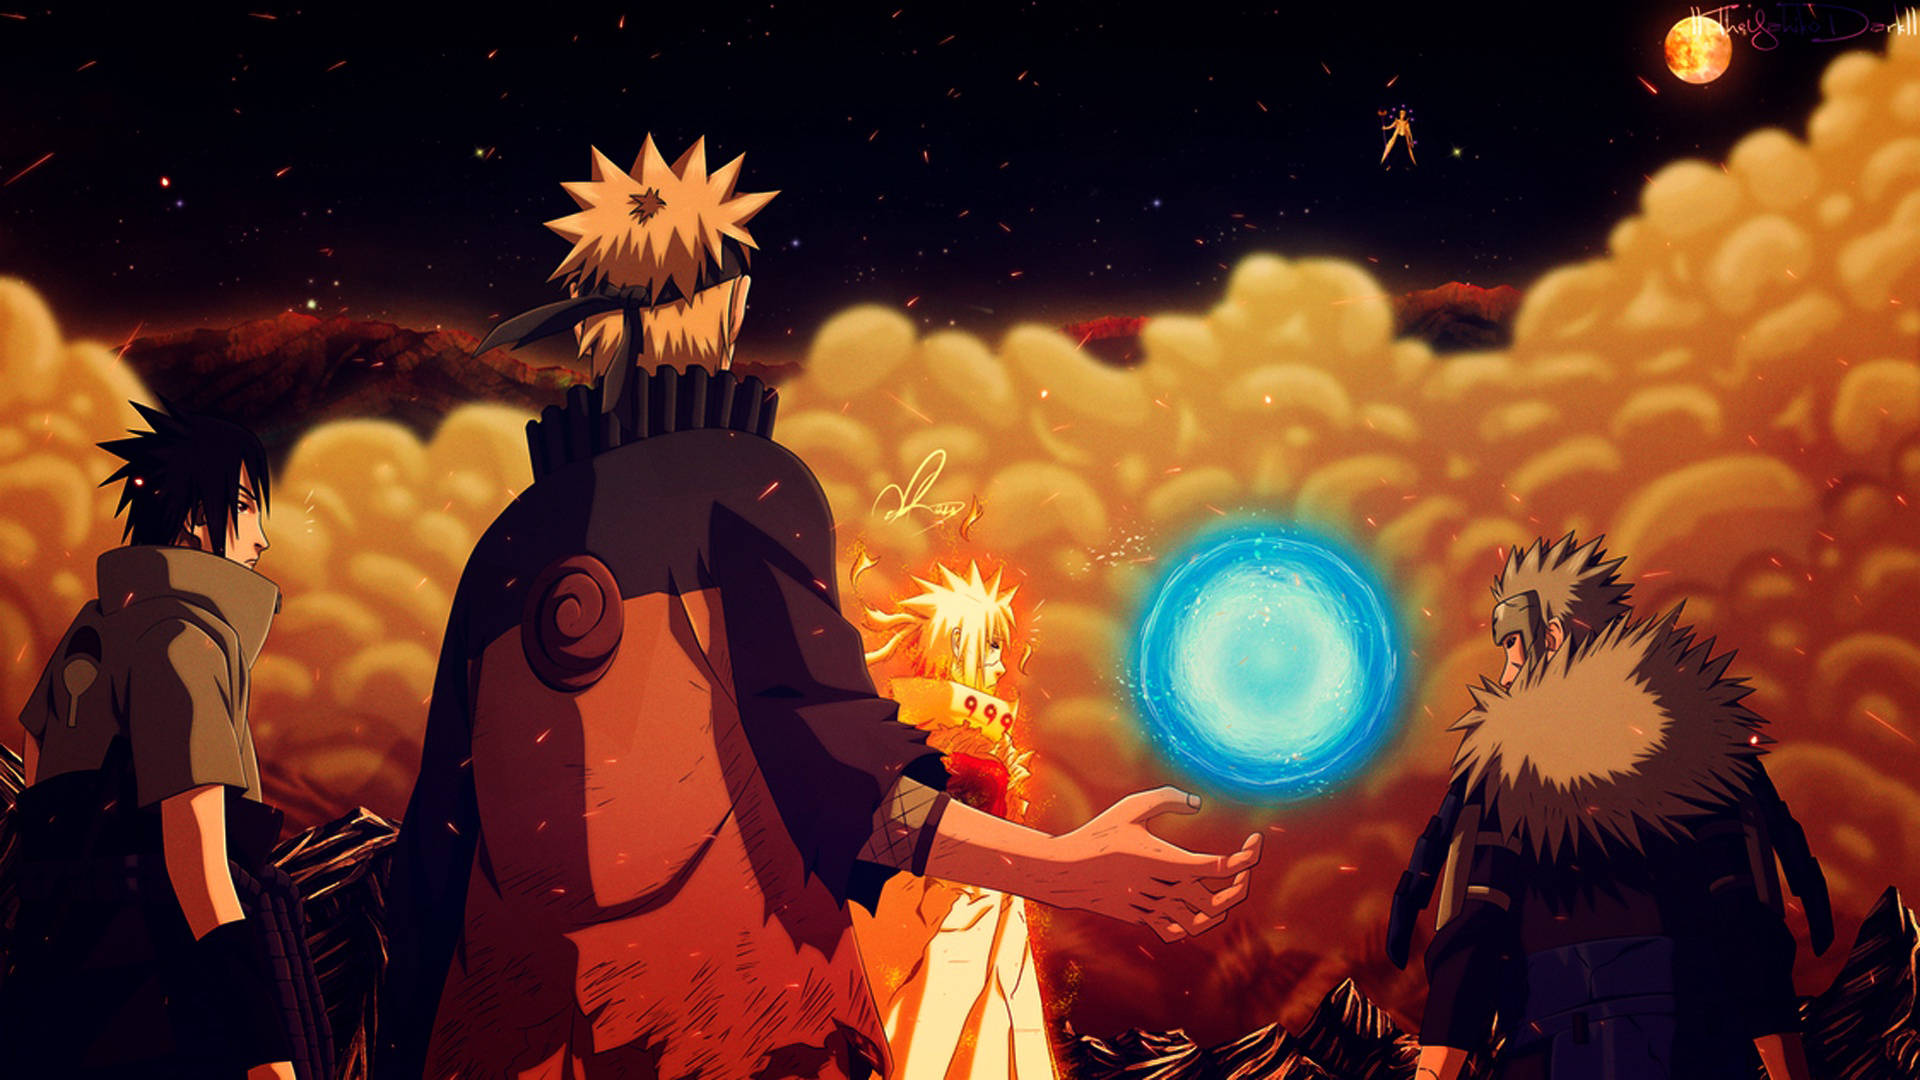 Coolest Naruto With Glowing Light